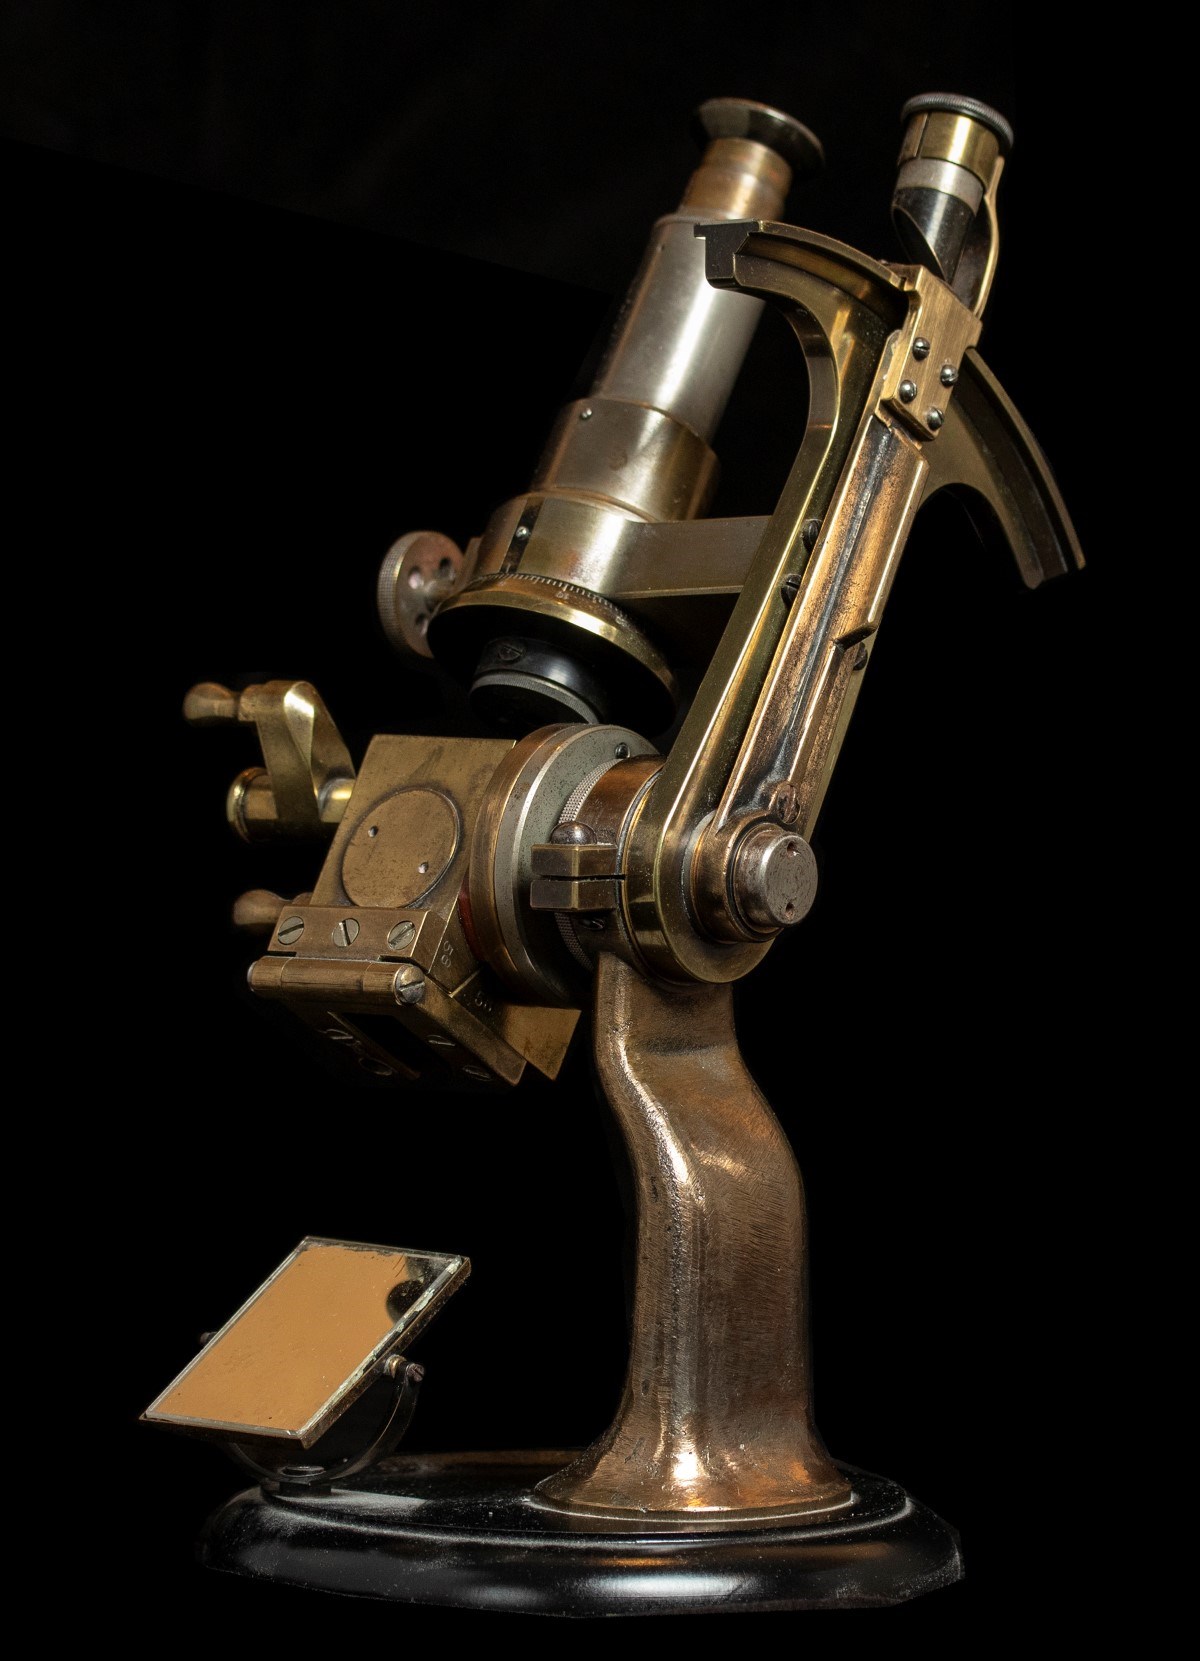 Three-quarter view of an Abbe refractometer made of a worn brass-like metal. The instrument resembles a microscope with an eyepiece at the top and a slanted platform at the bottom to place the sample.